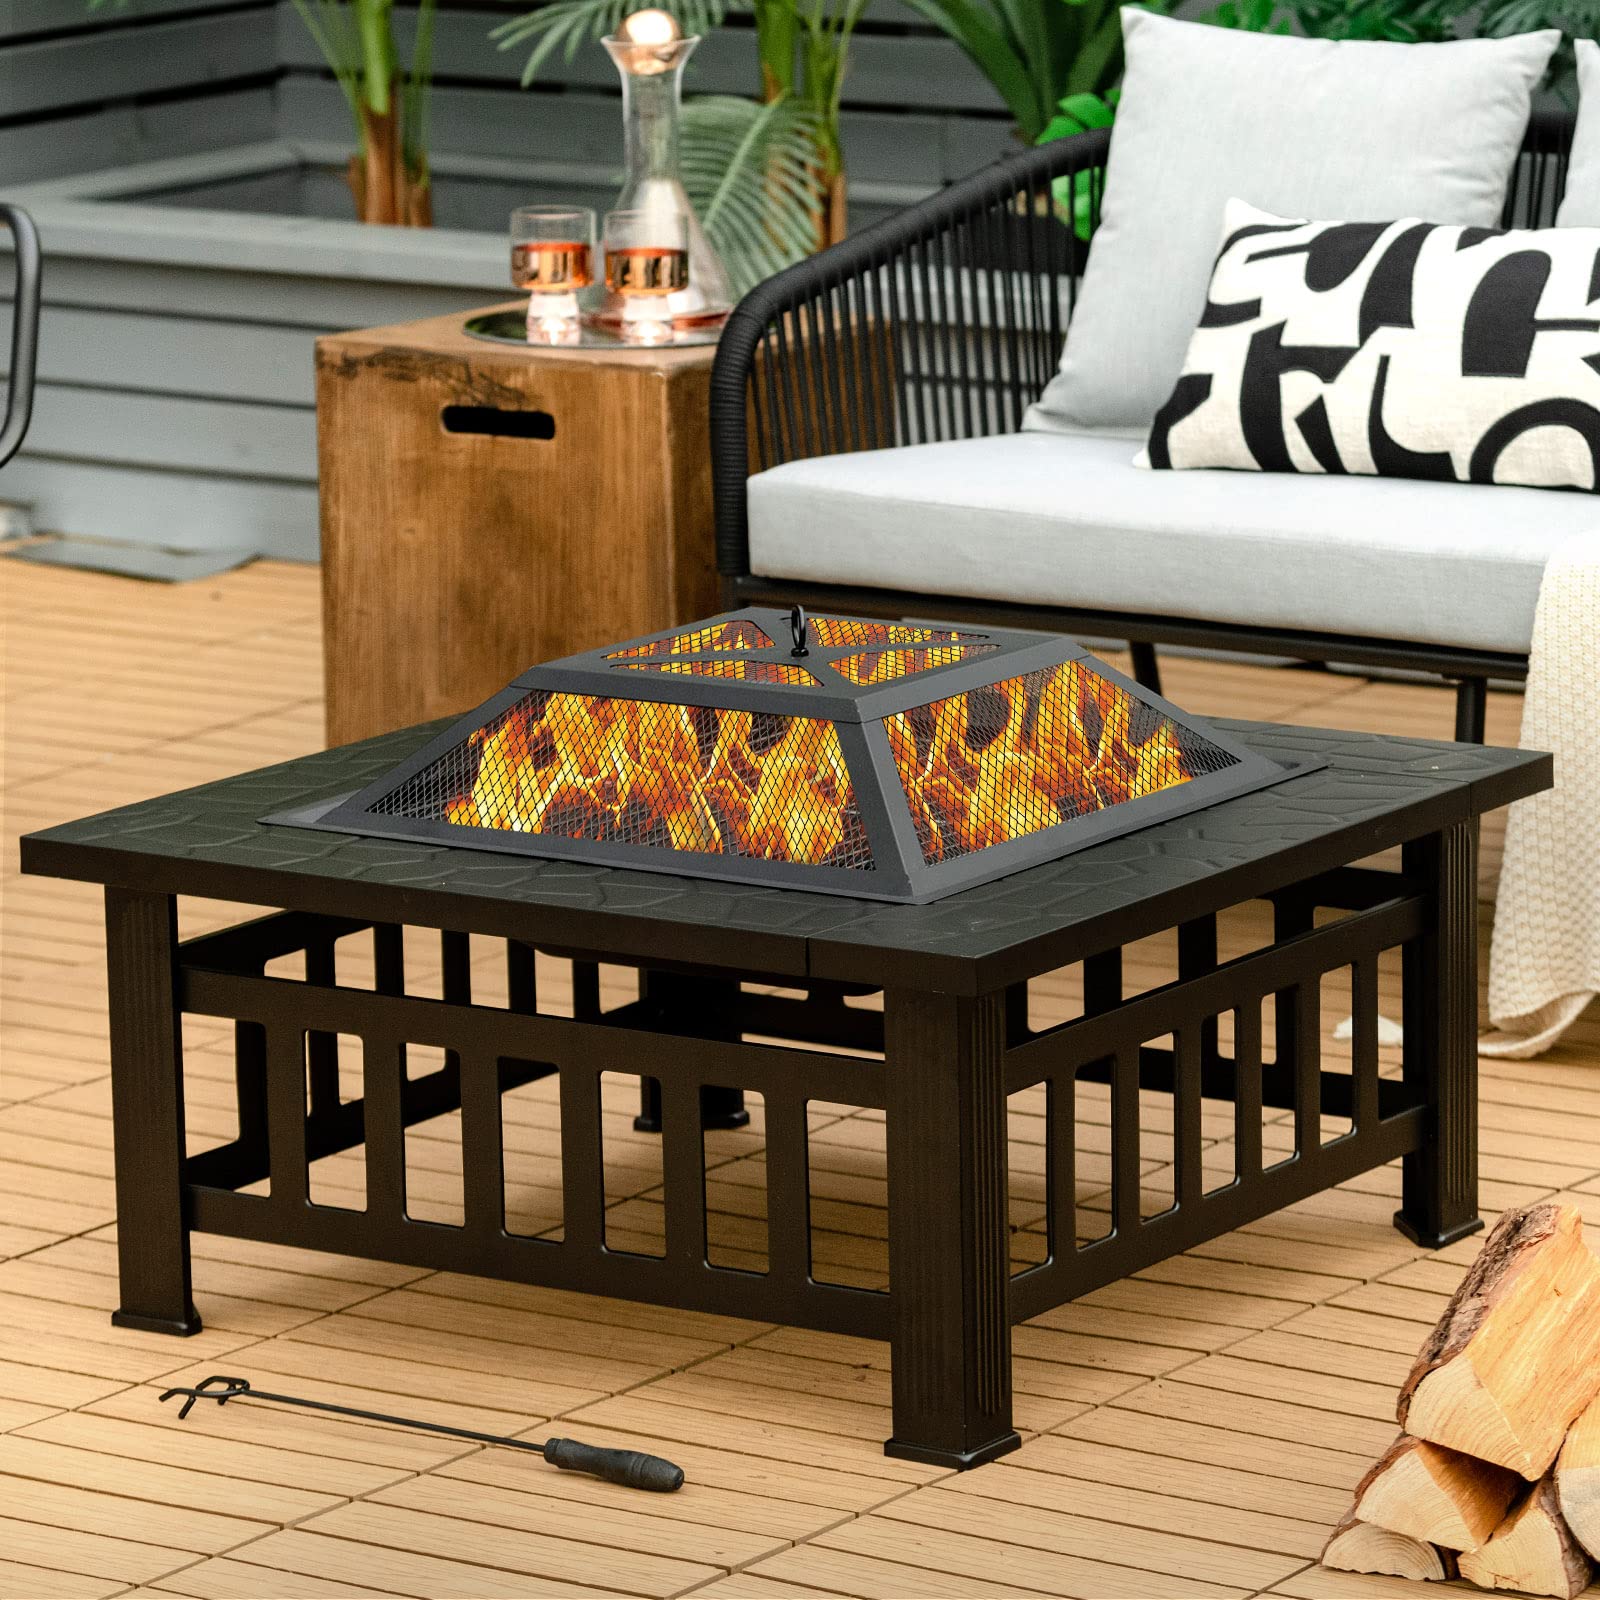 32" Outdoor Fire Pits, 3 in 1 Square Wood Burning Firepit